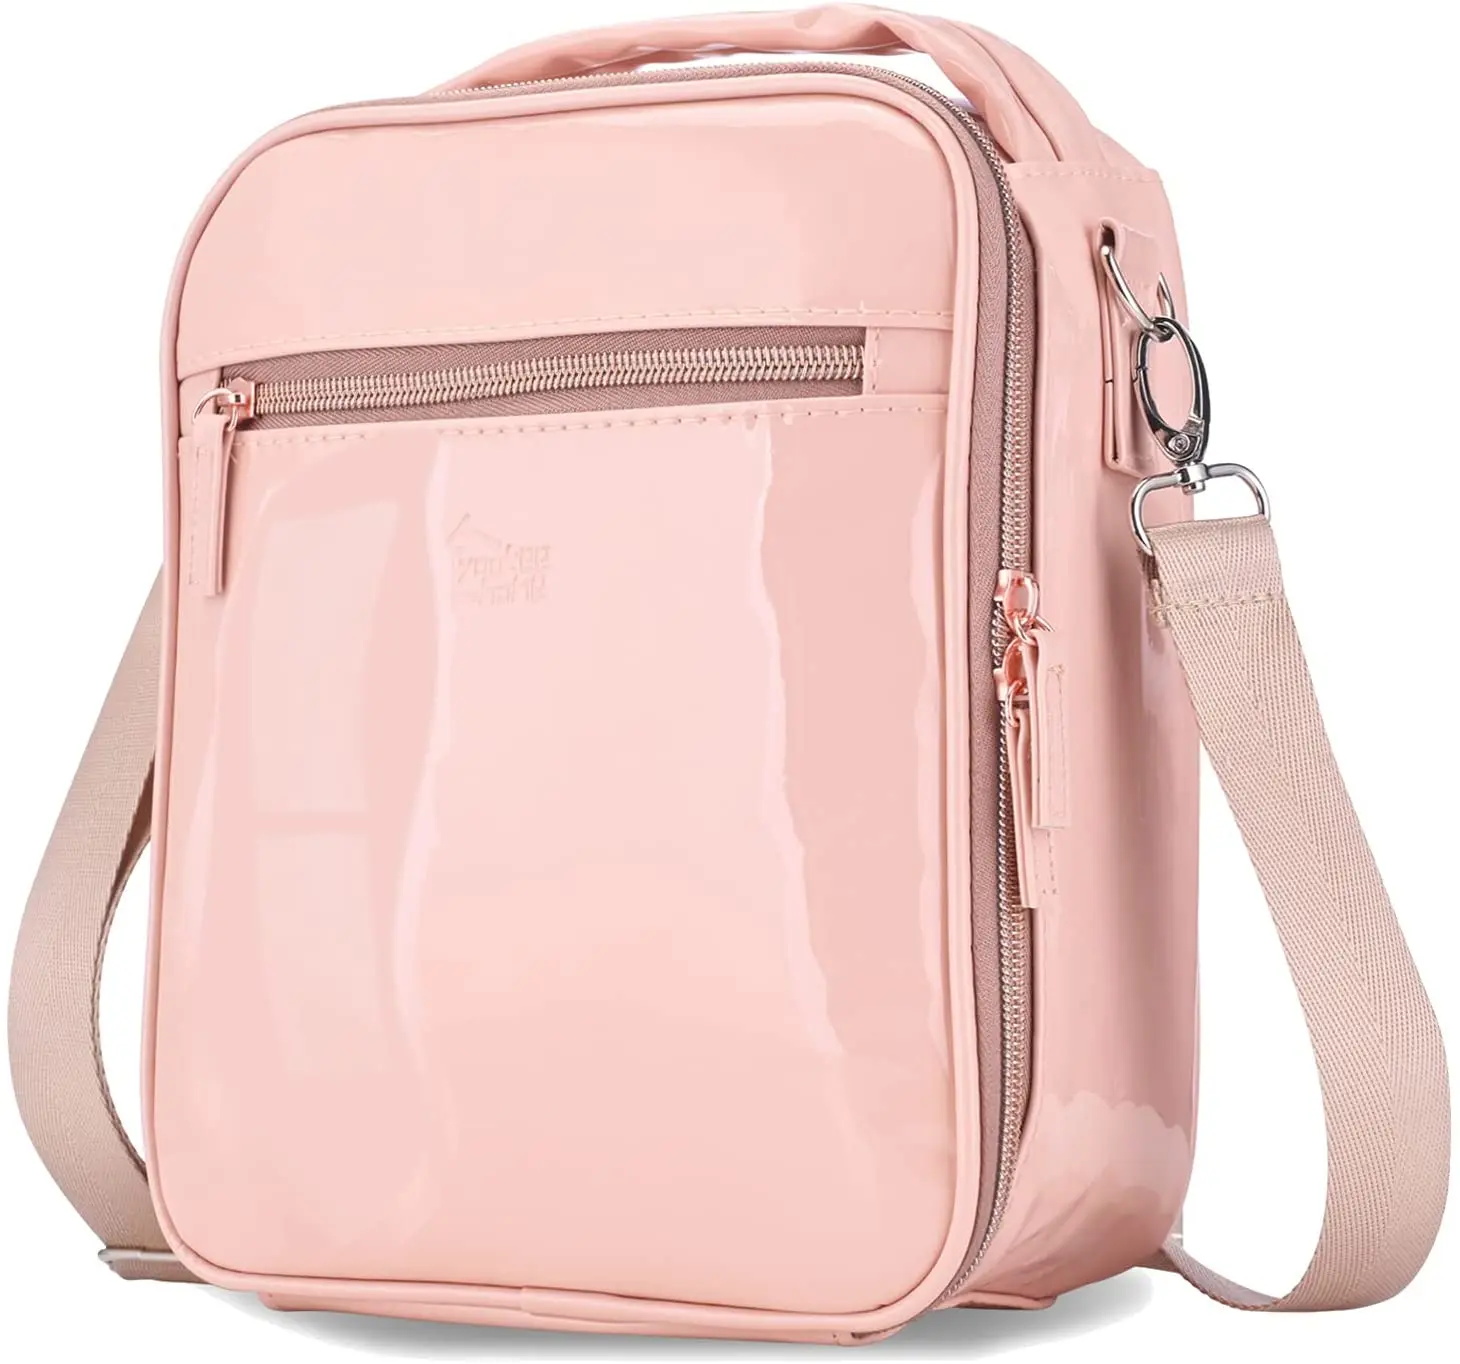 BeautyGoodies Pink Lunch bag Women Pink Lunch Box for Women, Designer Pink  Lunch Bags for Women Pink Lunchbox Pink Cooler Bag Insulated Lunch Bag Pink